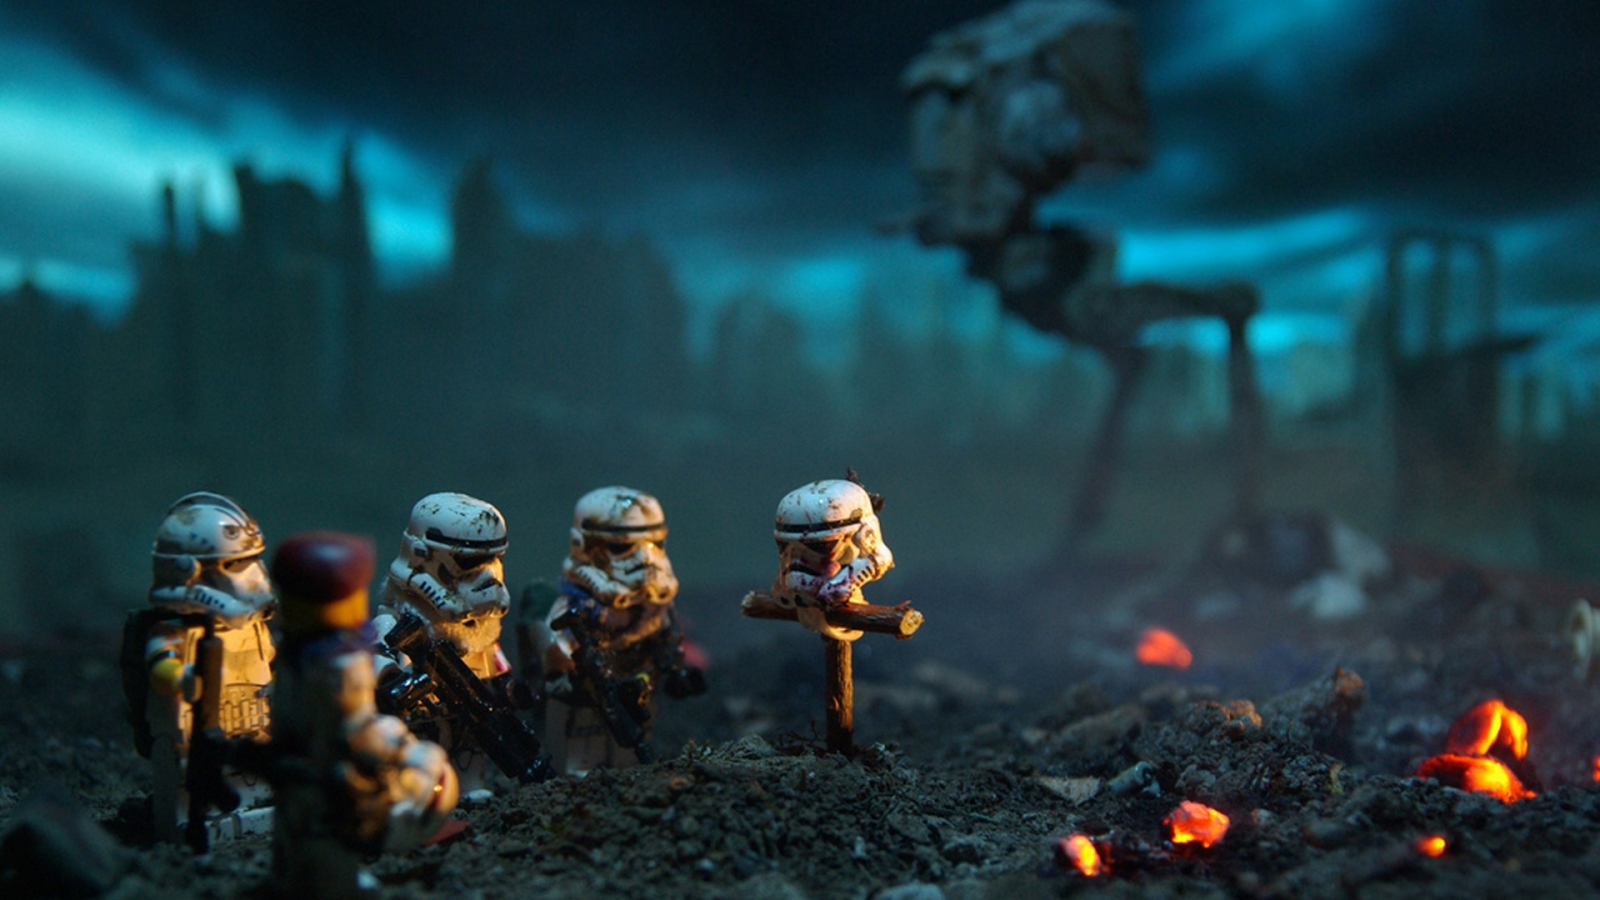 Star Wars Lego Soldiers for 1600 x 900 HDTV resolution